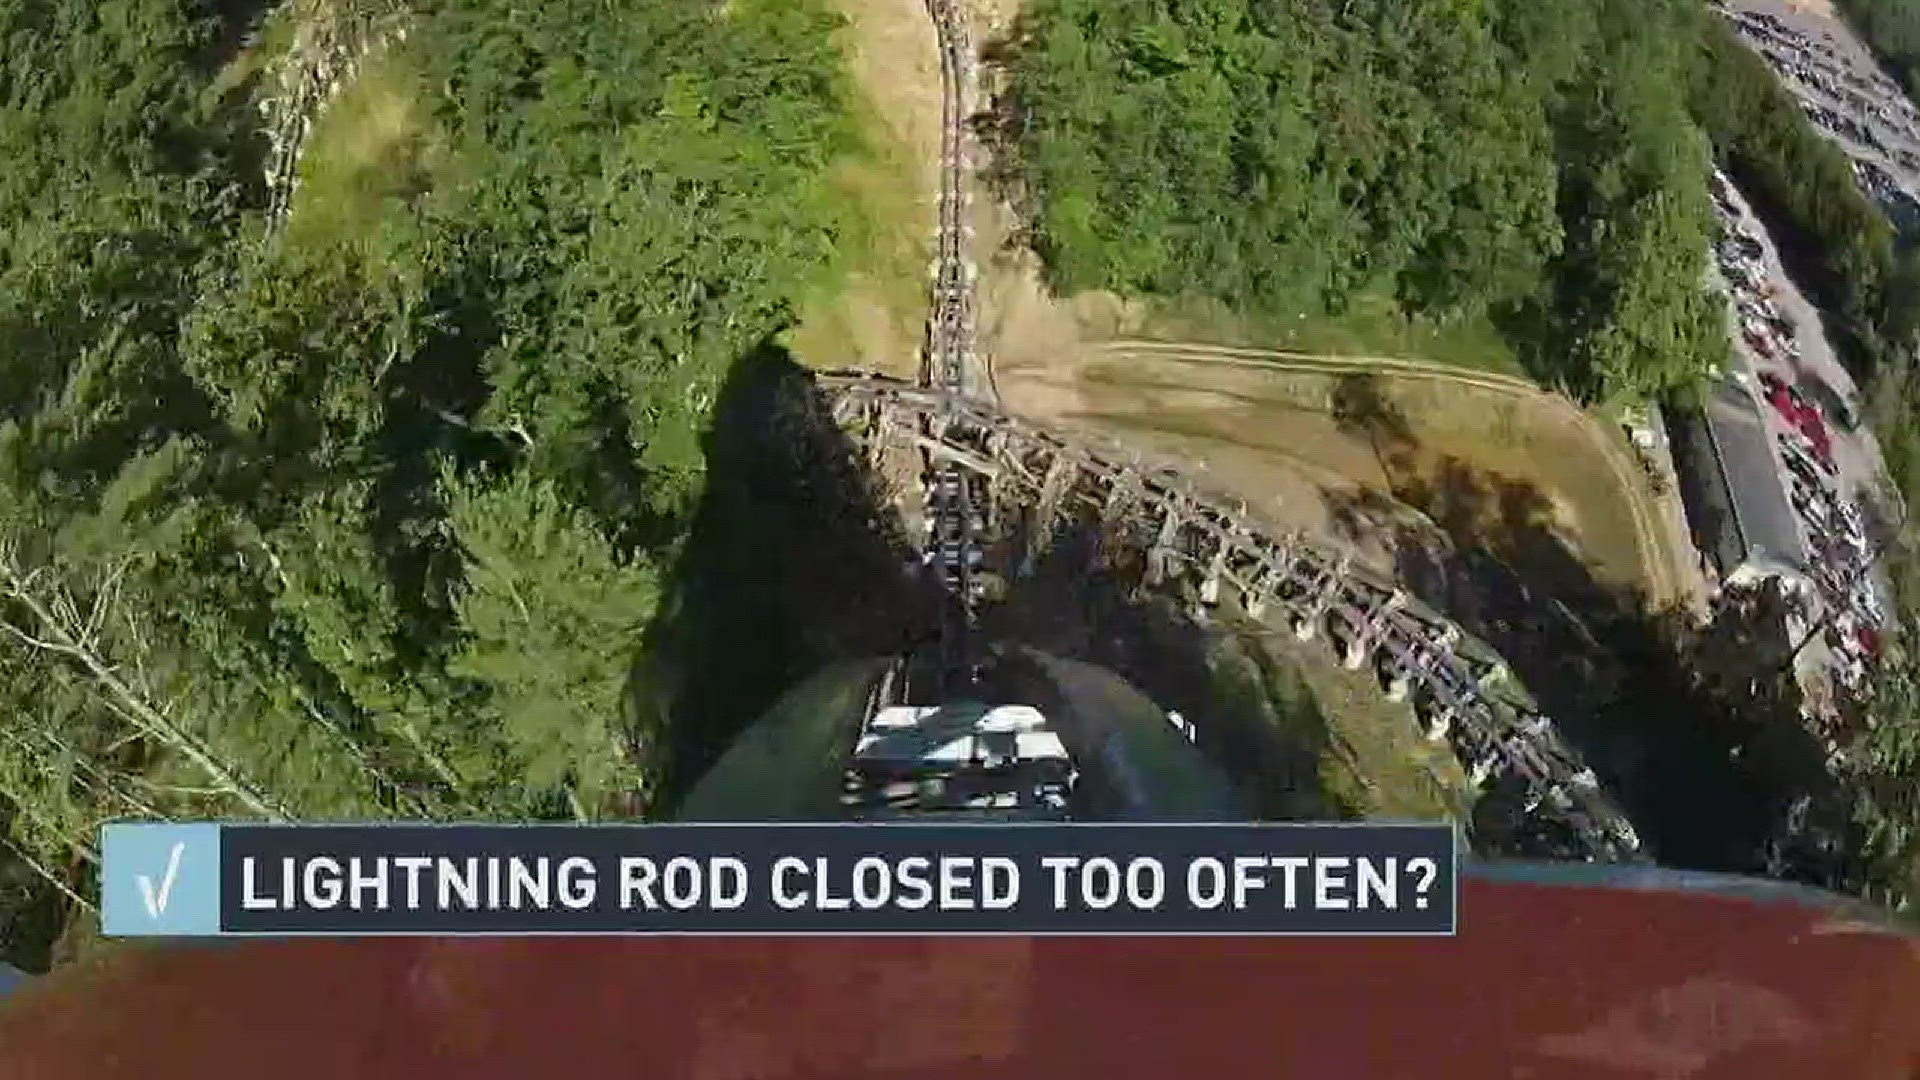 Viewers wanted to know, Is Dollywood's Lightning Rod rollercoaster closed more often than it's open? Reporter Madison Wade looked into the question.